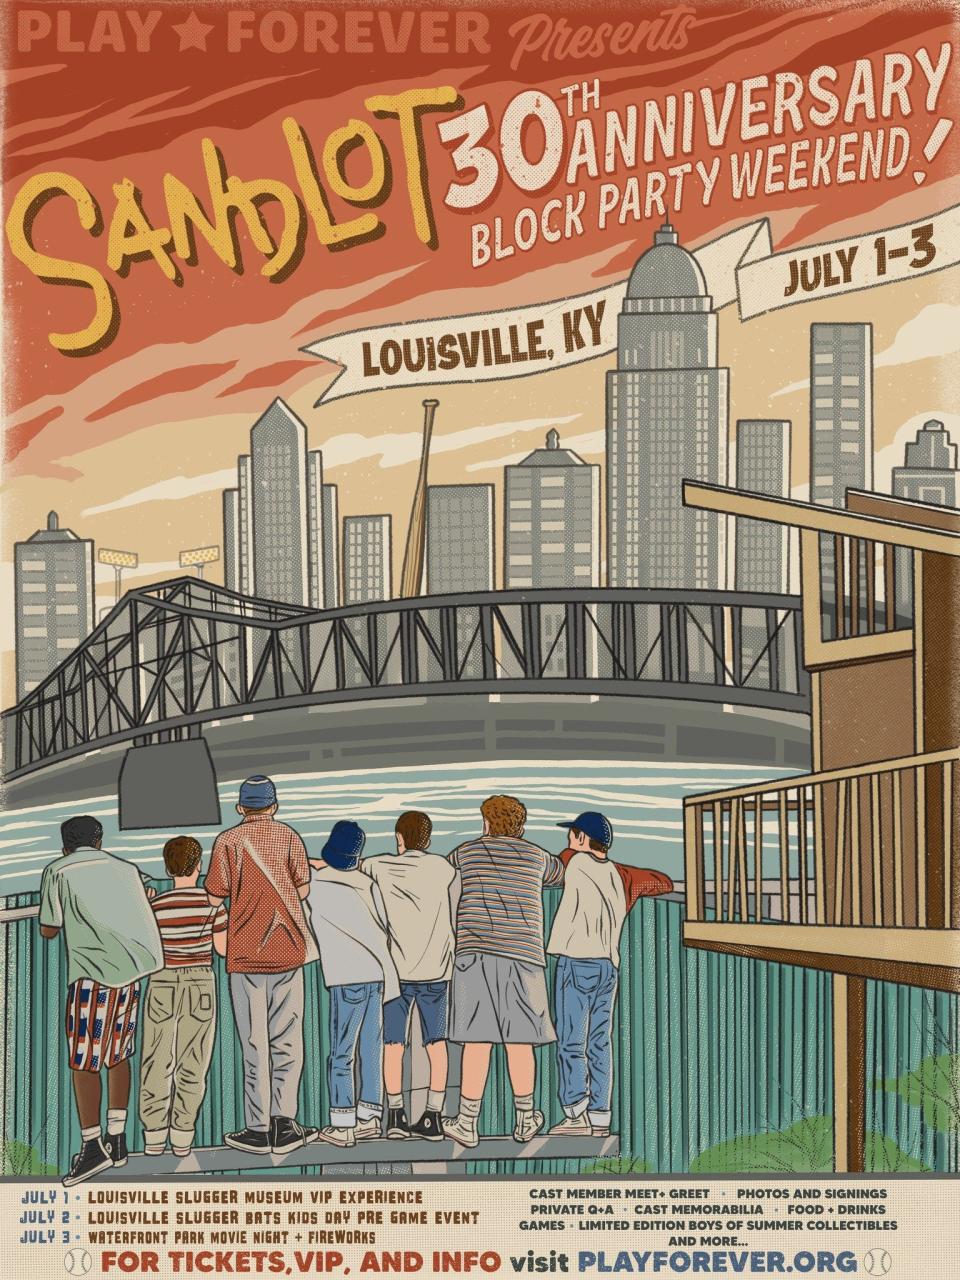 'The Sandlot' 30th anniversary block party weekend in Louisville, Kentucky takes place July 1-3, 2023